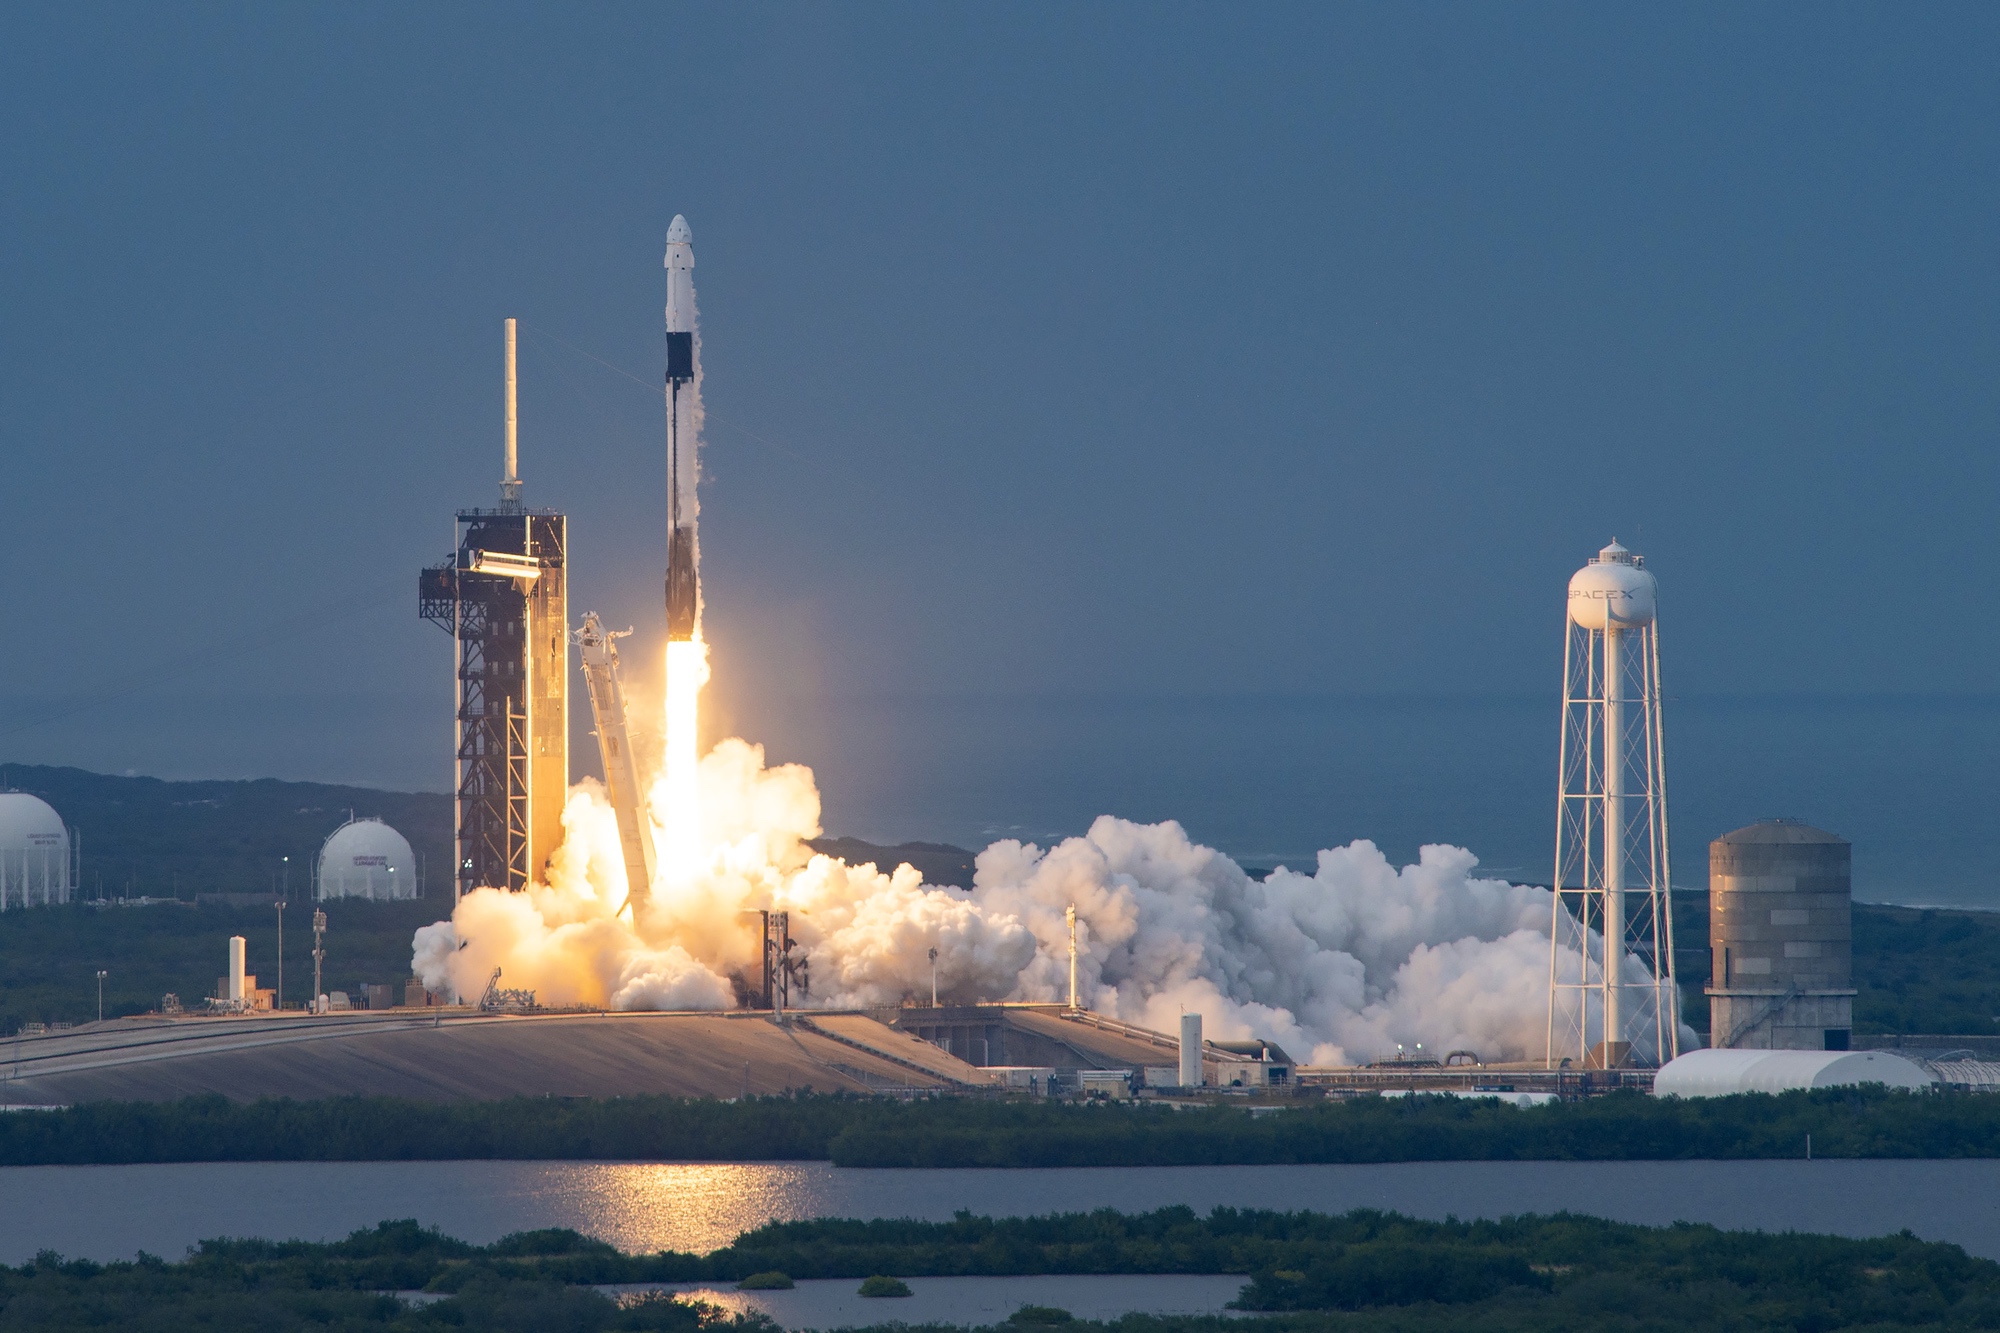 SpaceX launches third Axiom mission to ISS